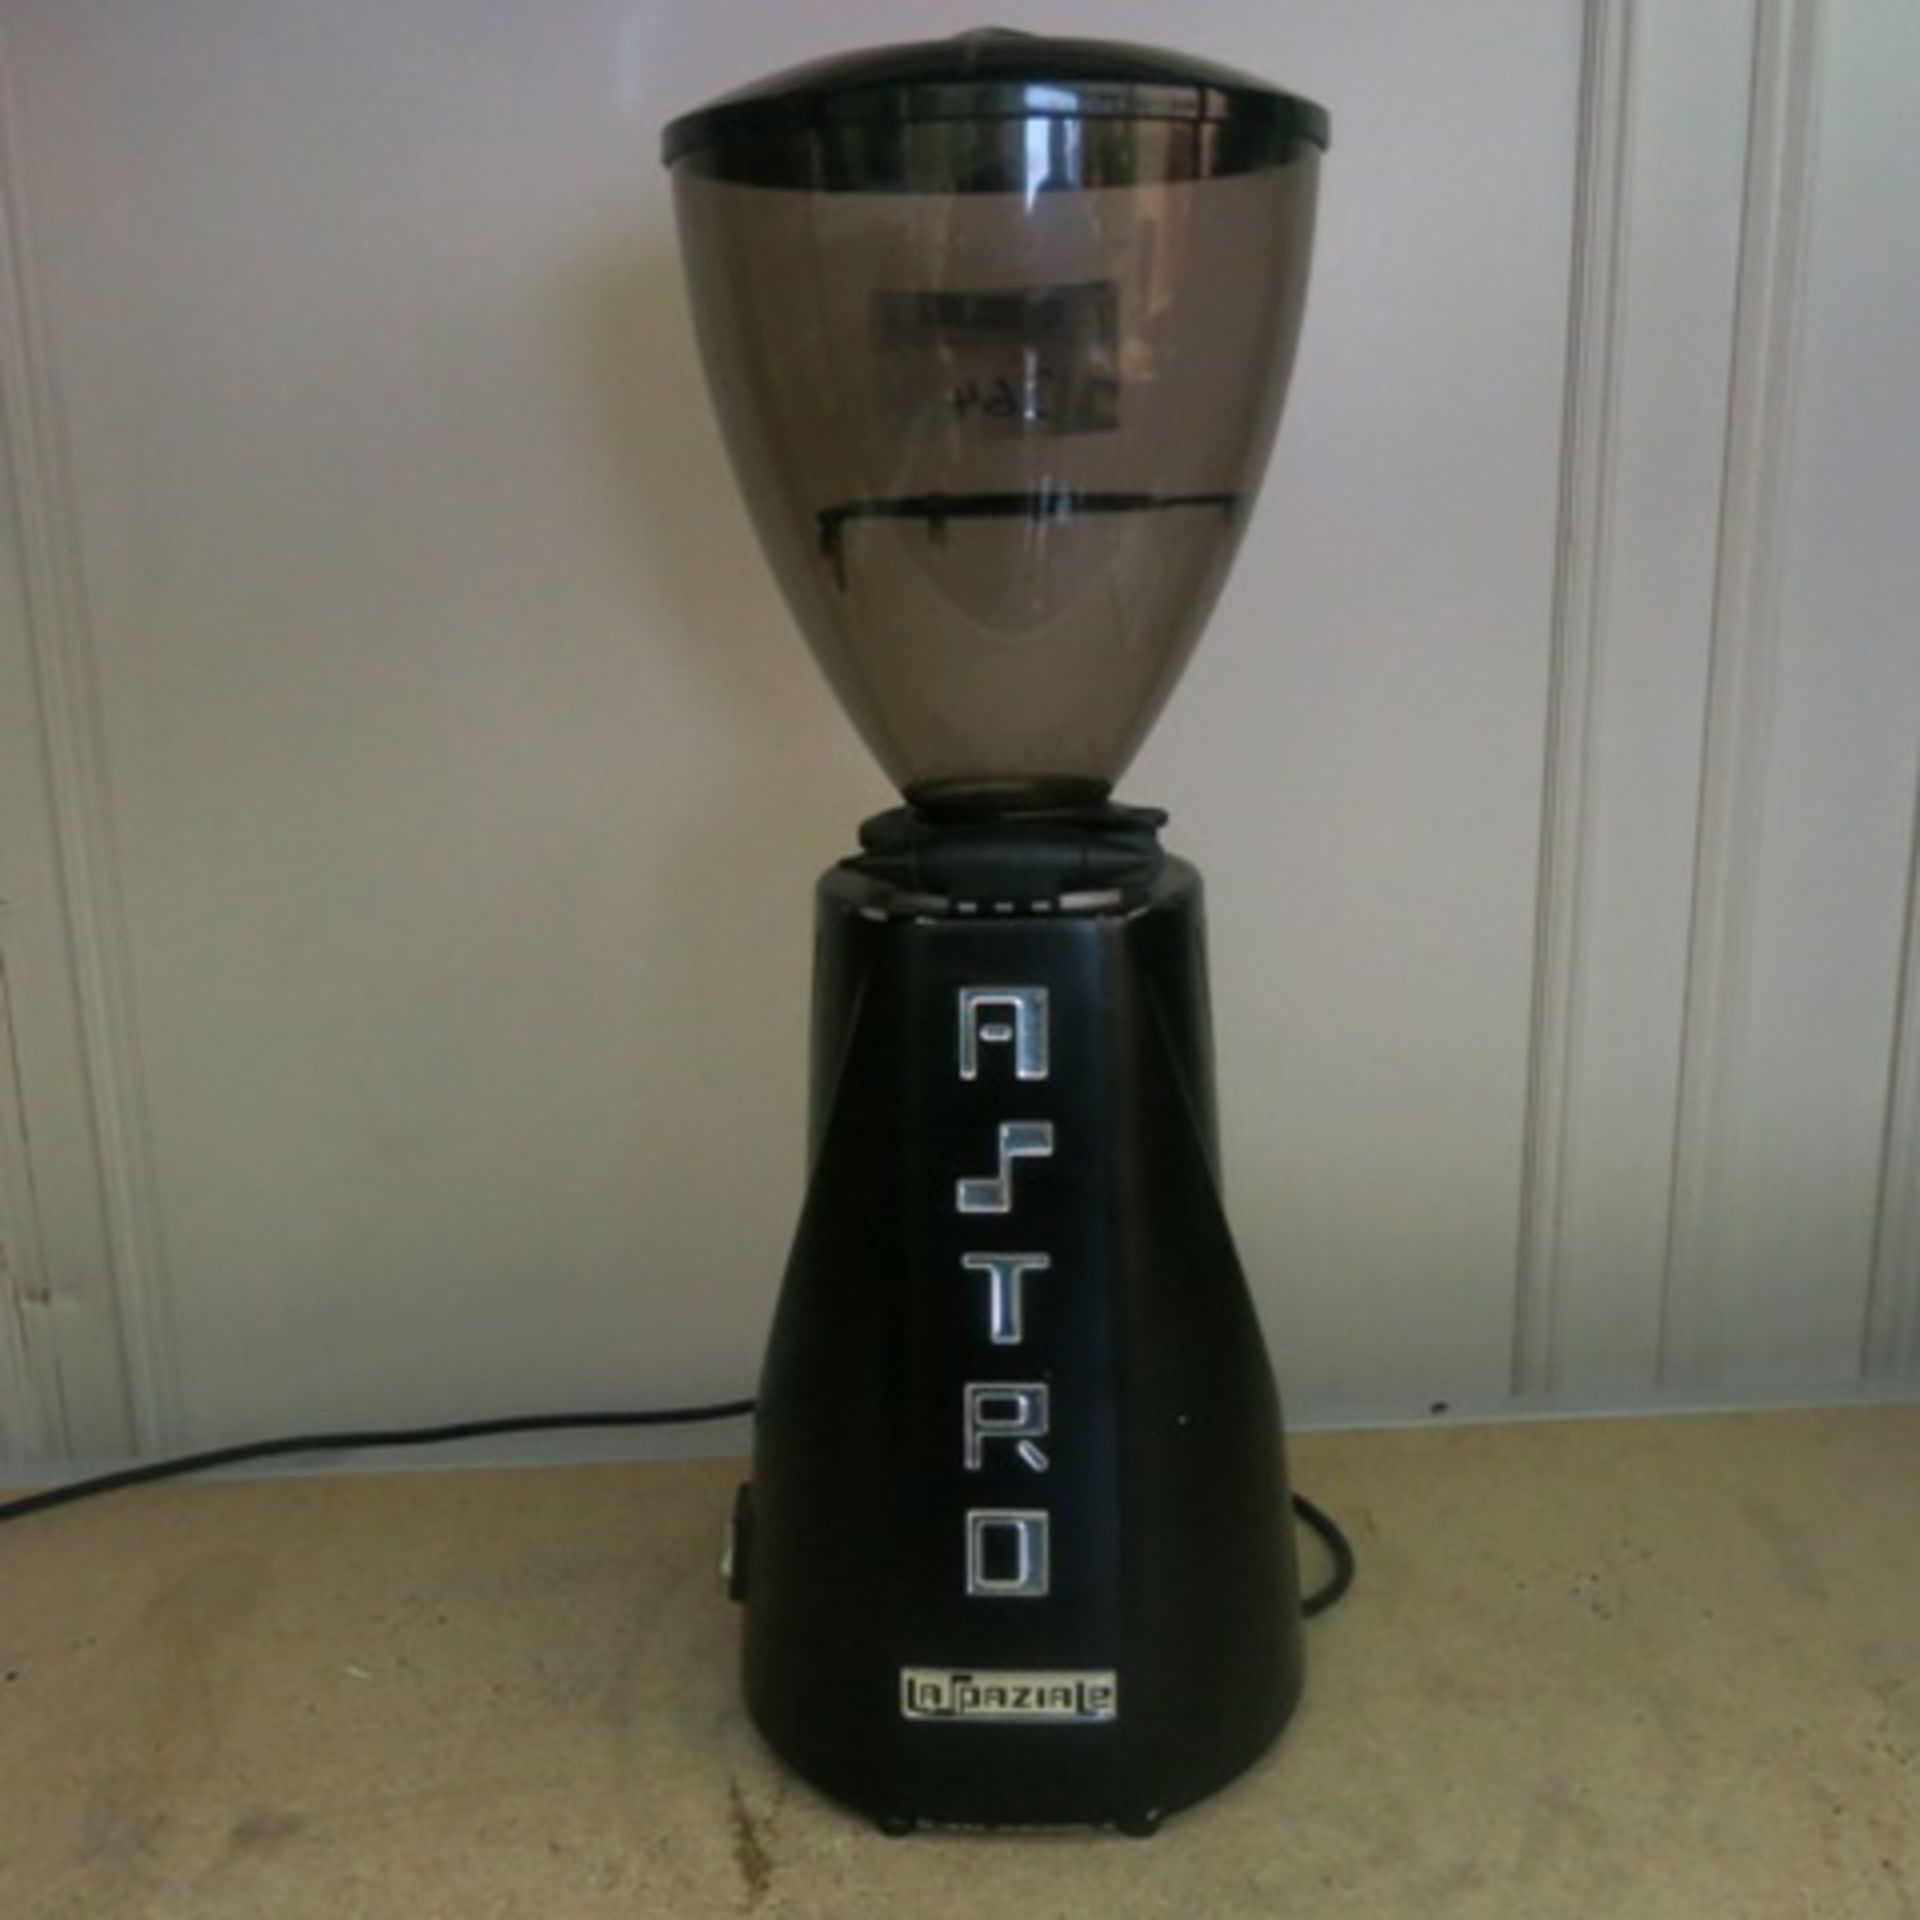 La Spaziale Astro Coffee Grinder. Note: LCD Not Working - Image 3 of 4